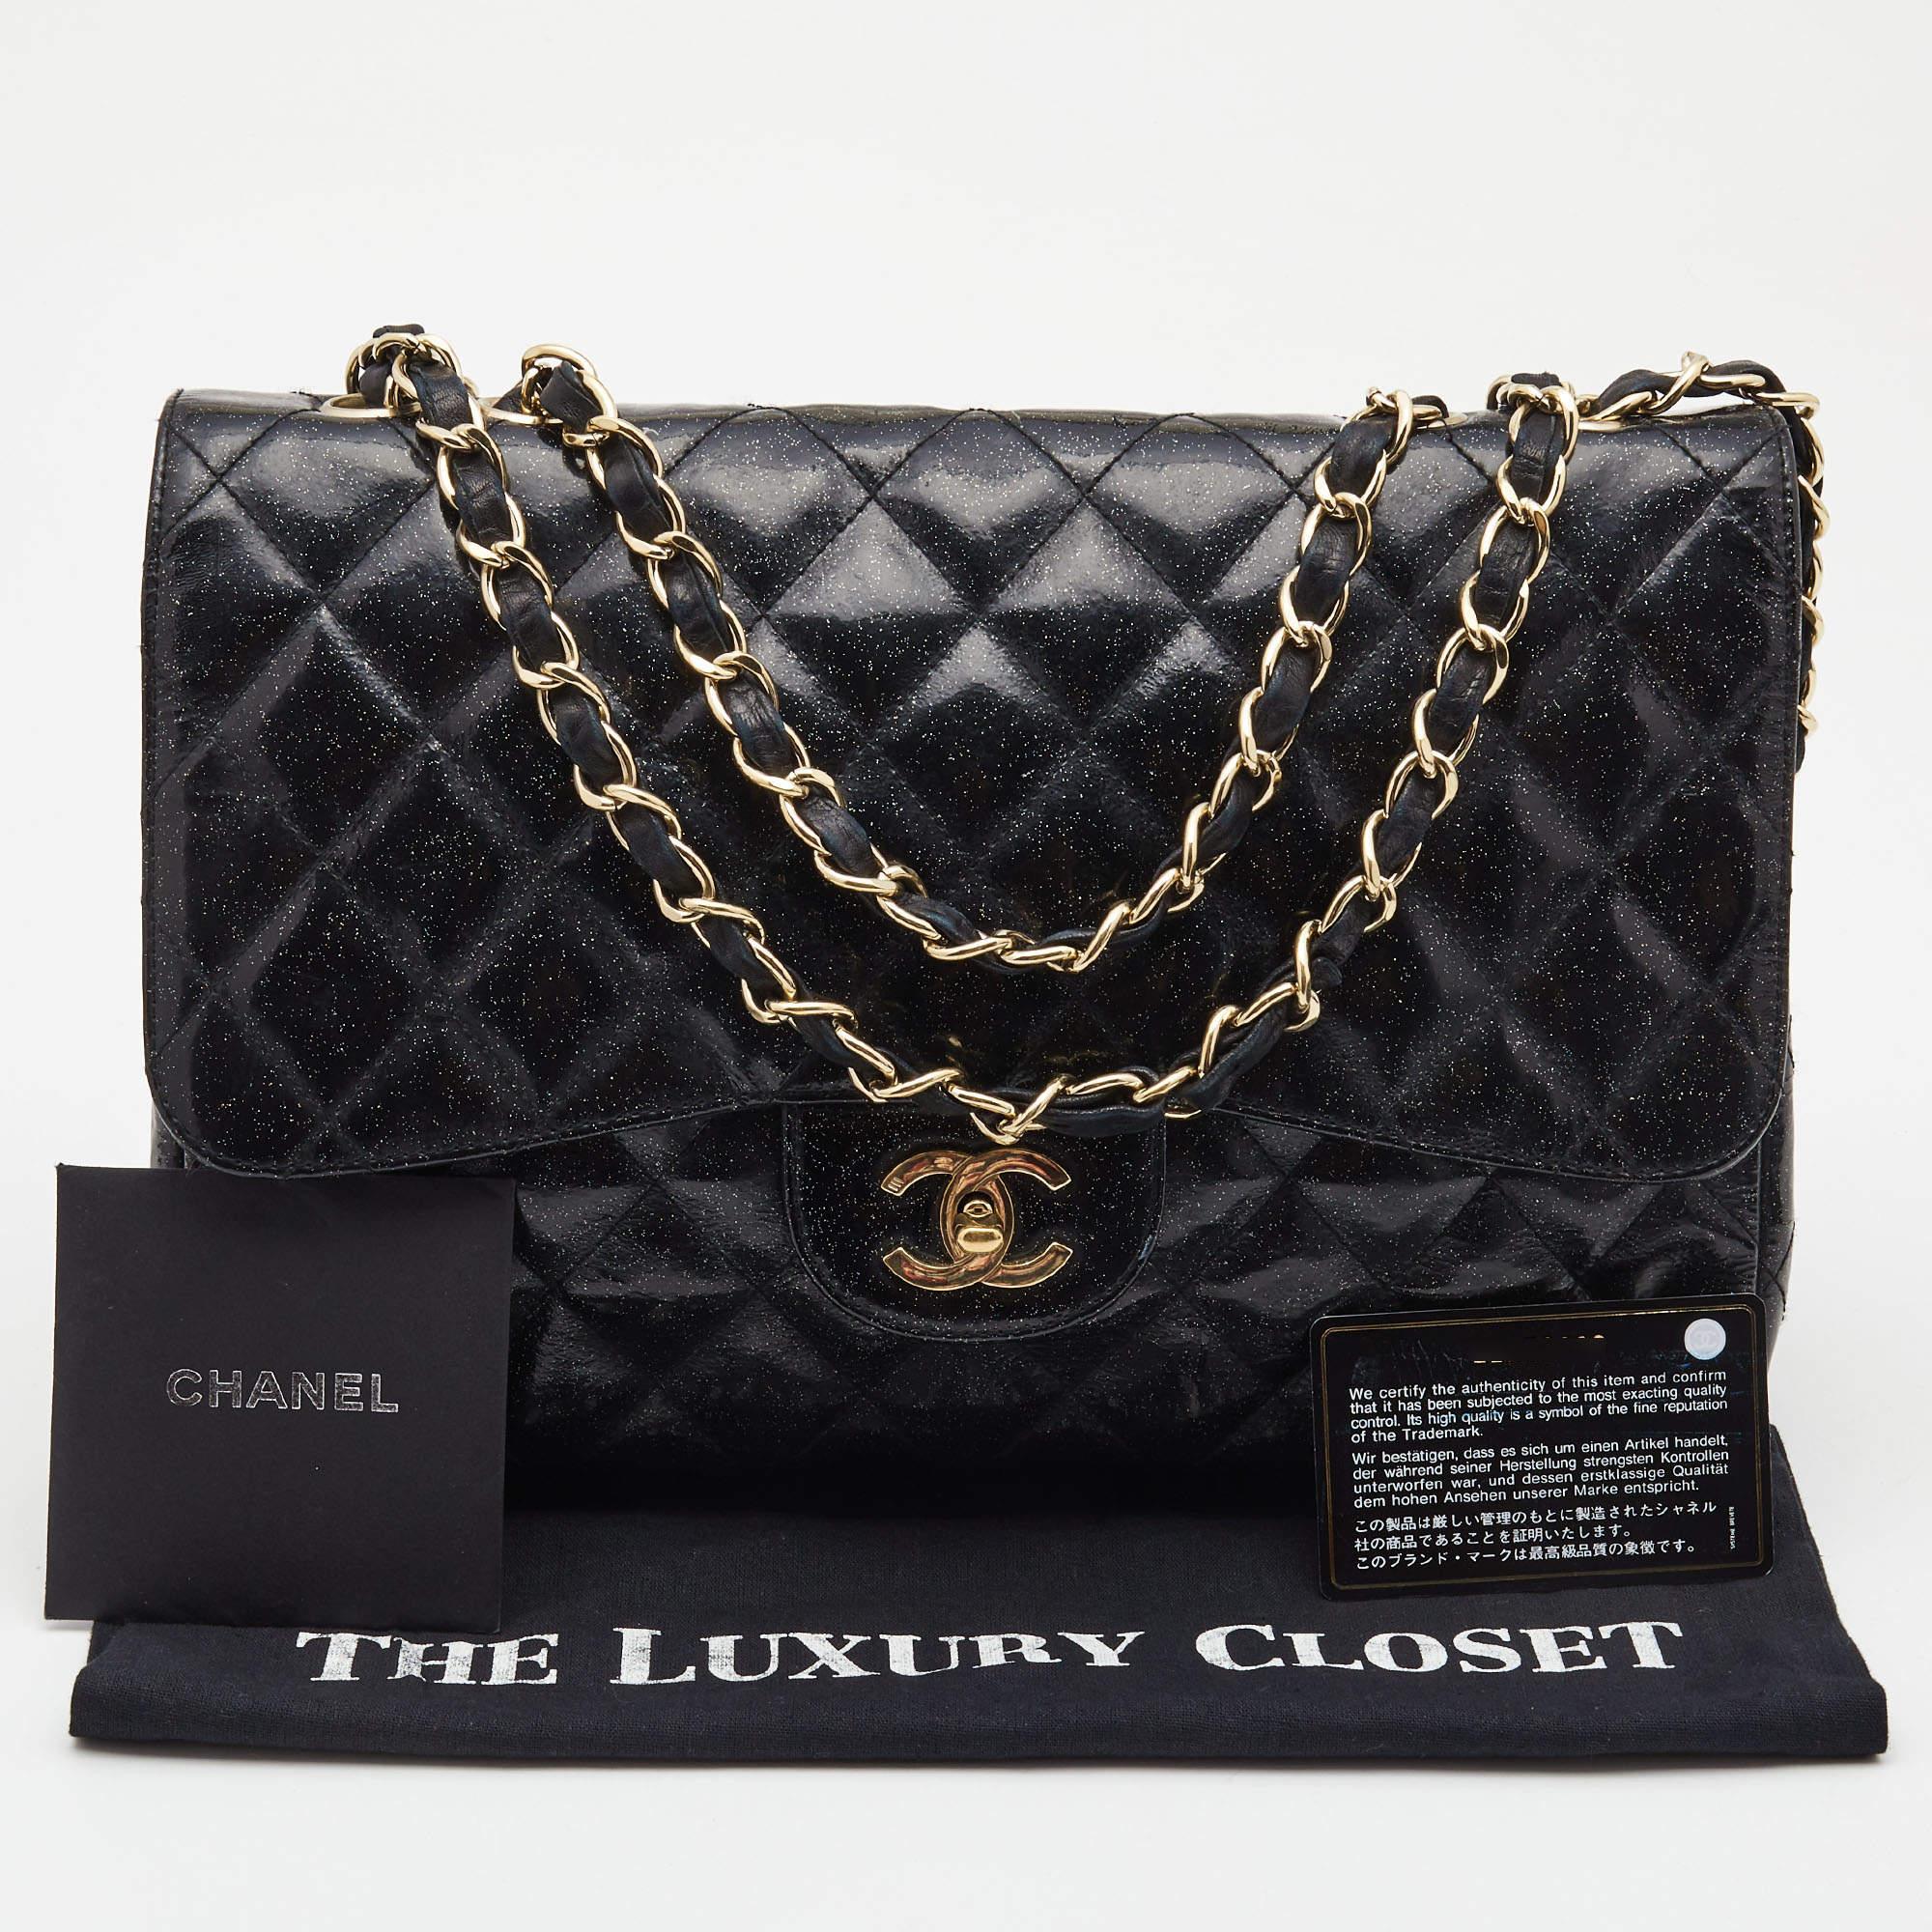 Chanel Black Quilted Glitter Patent Leather Jumbo Classic Single Flap Bag In Good Condition For Sale In Dubai, Al Qouz 2